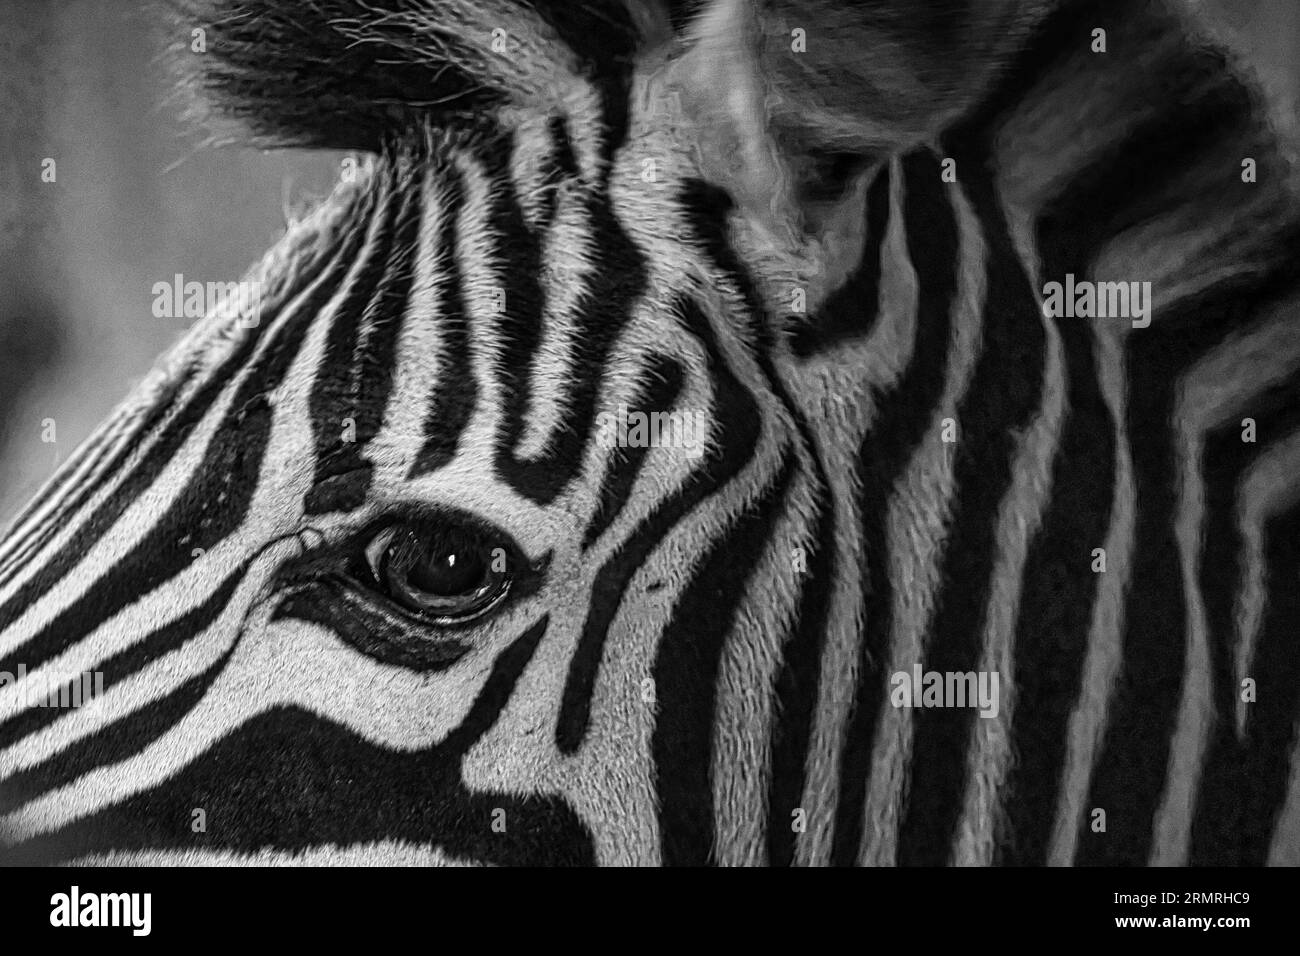 Zebra head taken from the side in black and white. Stripes on the fur. Animal shot of a mammal Stock Photo